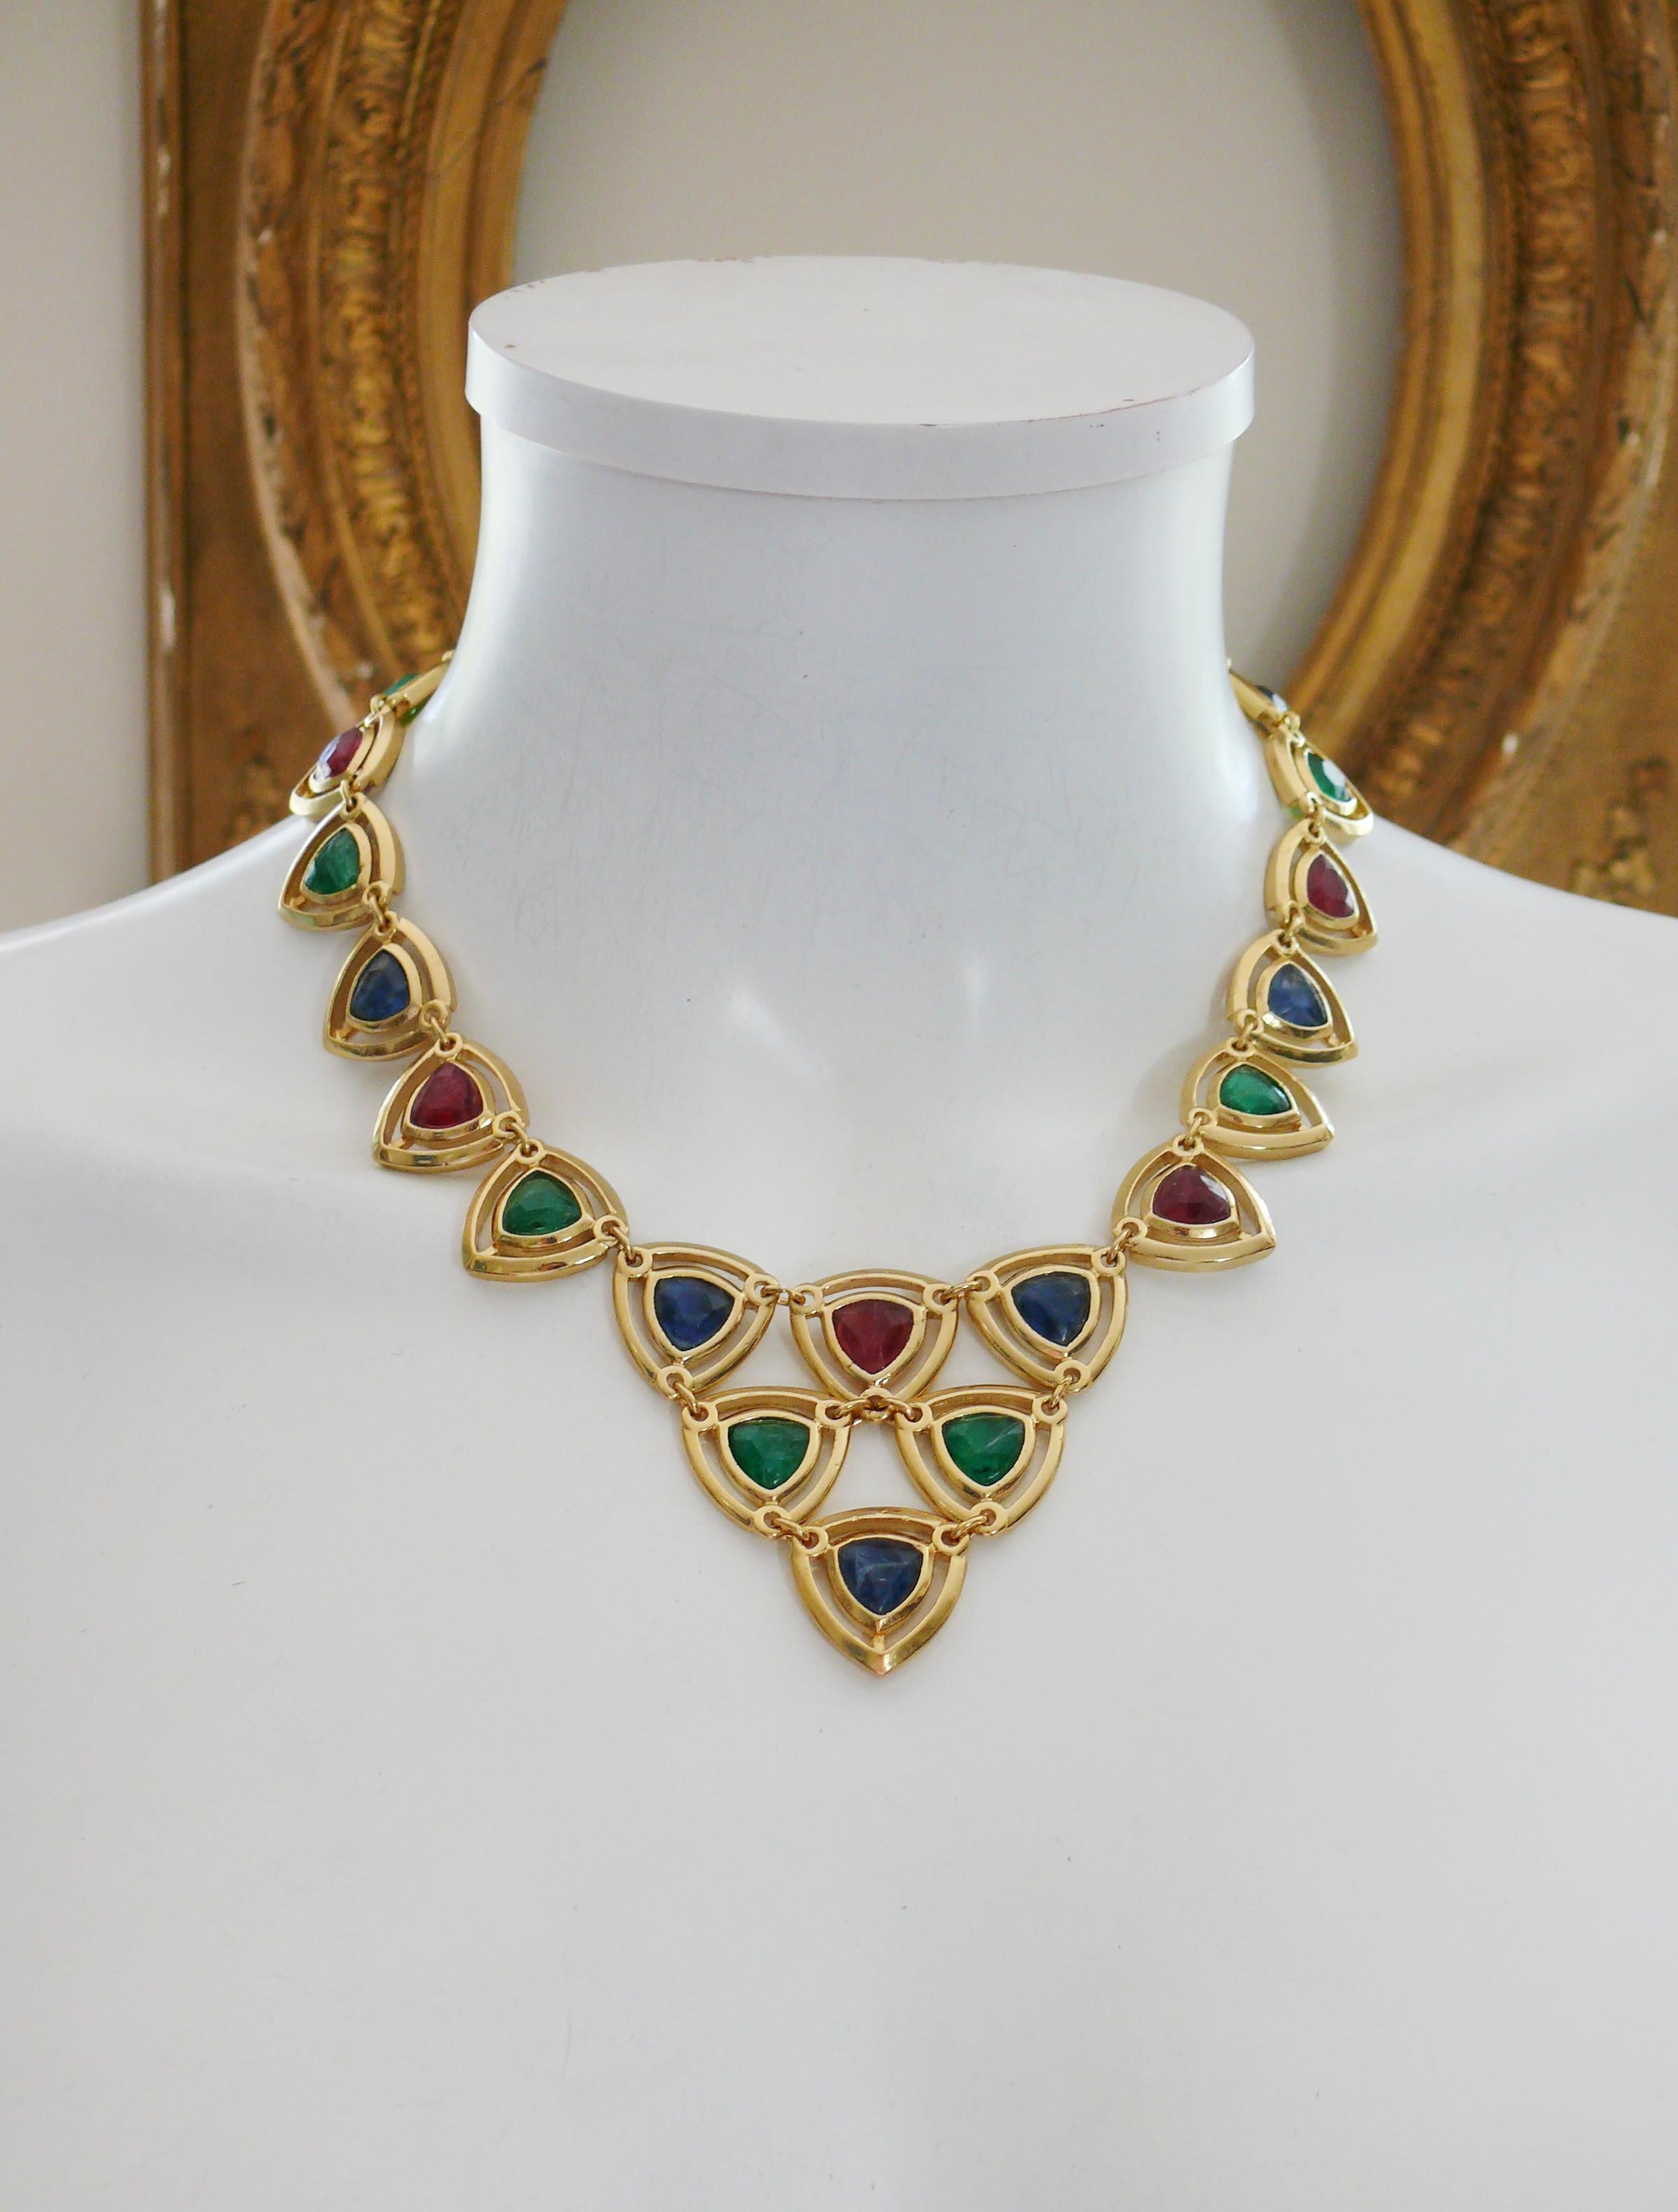 CHRISTIAN DIOR vintage gold toned necklace featuring a geometric design embellished with faux gemstones (ruby, emerald, sapphire) glass cabochons.

Secure clasp closure.

Embossed CHR. DIOR ©.

Indicative measurements : length approx. 43 cm (16.93